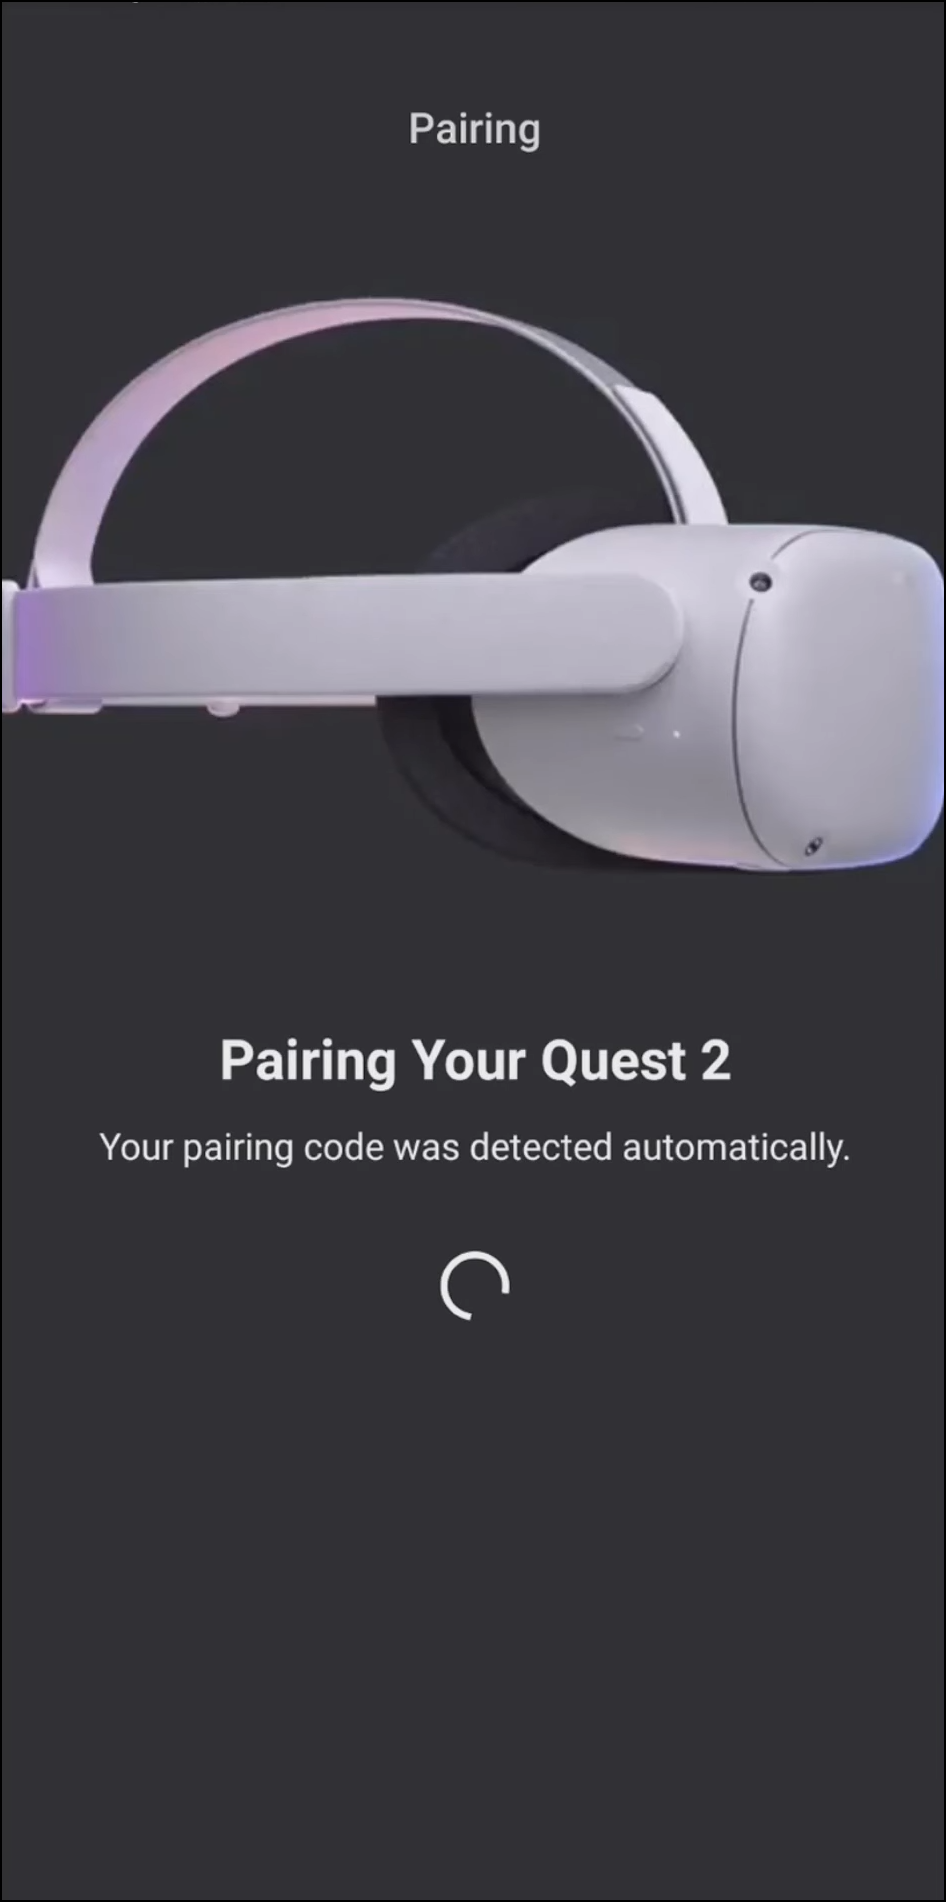 How to Get to Home Screen on an Oculus Quest 2